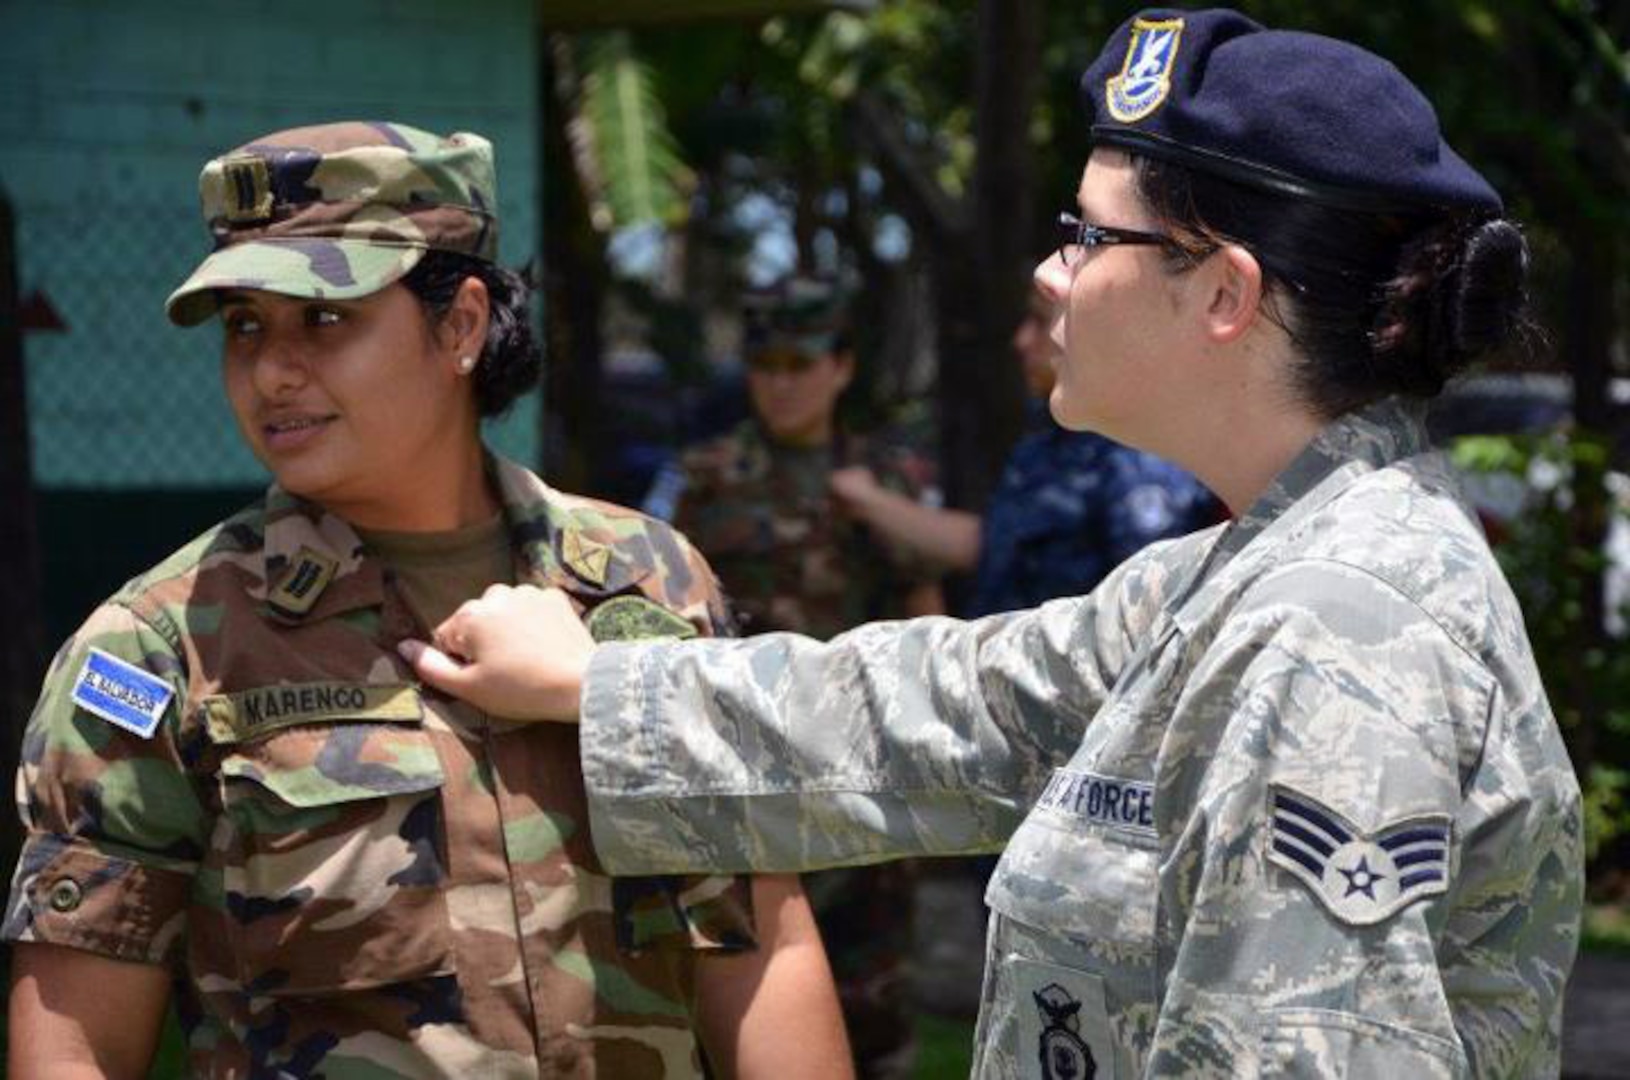 1st Lt. Carolina Marenco of the Salvadoran army and Senior Airman Heather Gagnon of the New Hampshire National Guard's 157th Security Forces Squadron, demonstrates a self defense technique during a military police exercise in Lourdes, El Salvador on Aug. 7, 2012.